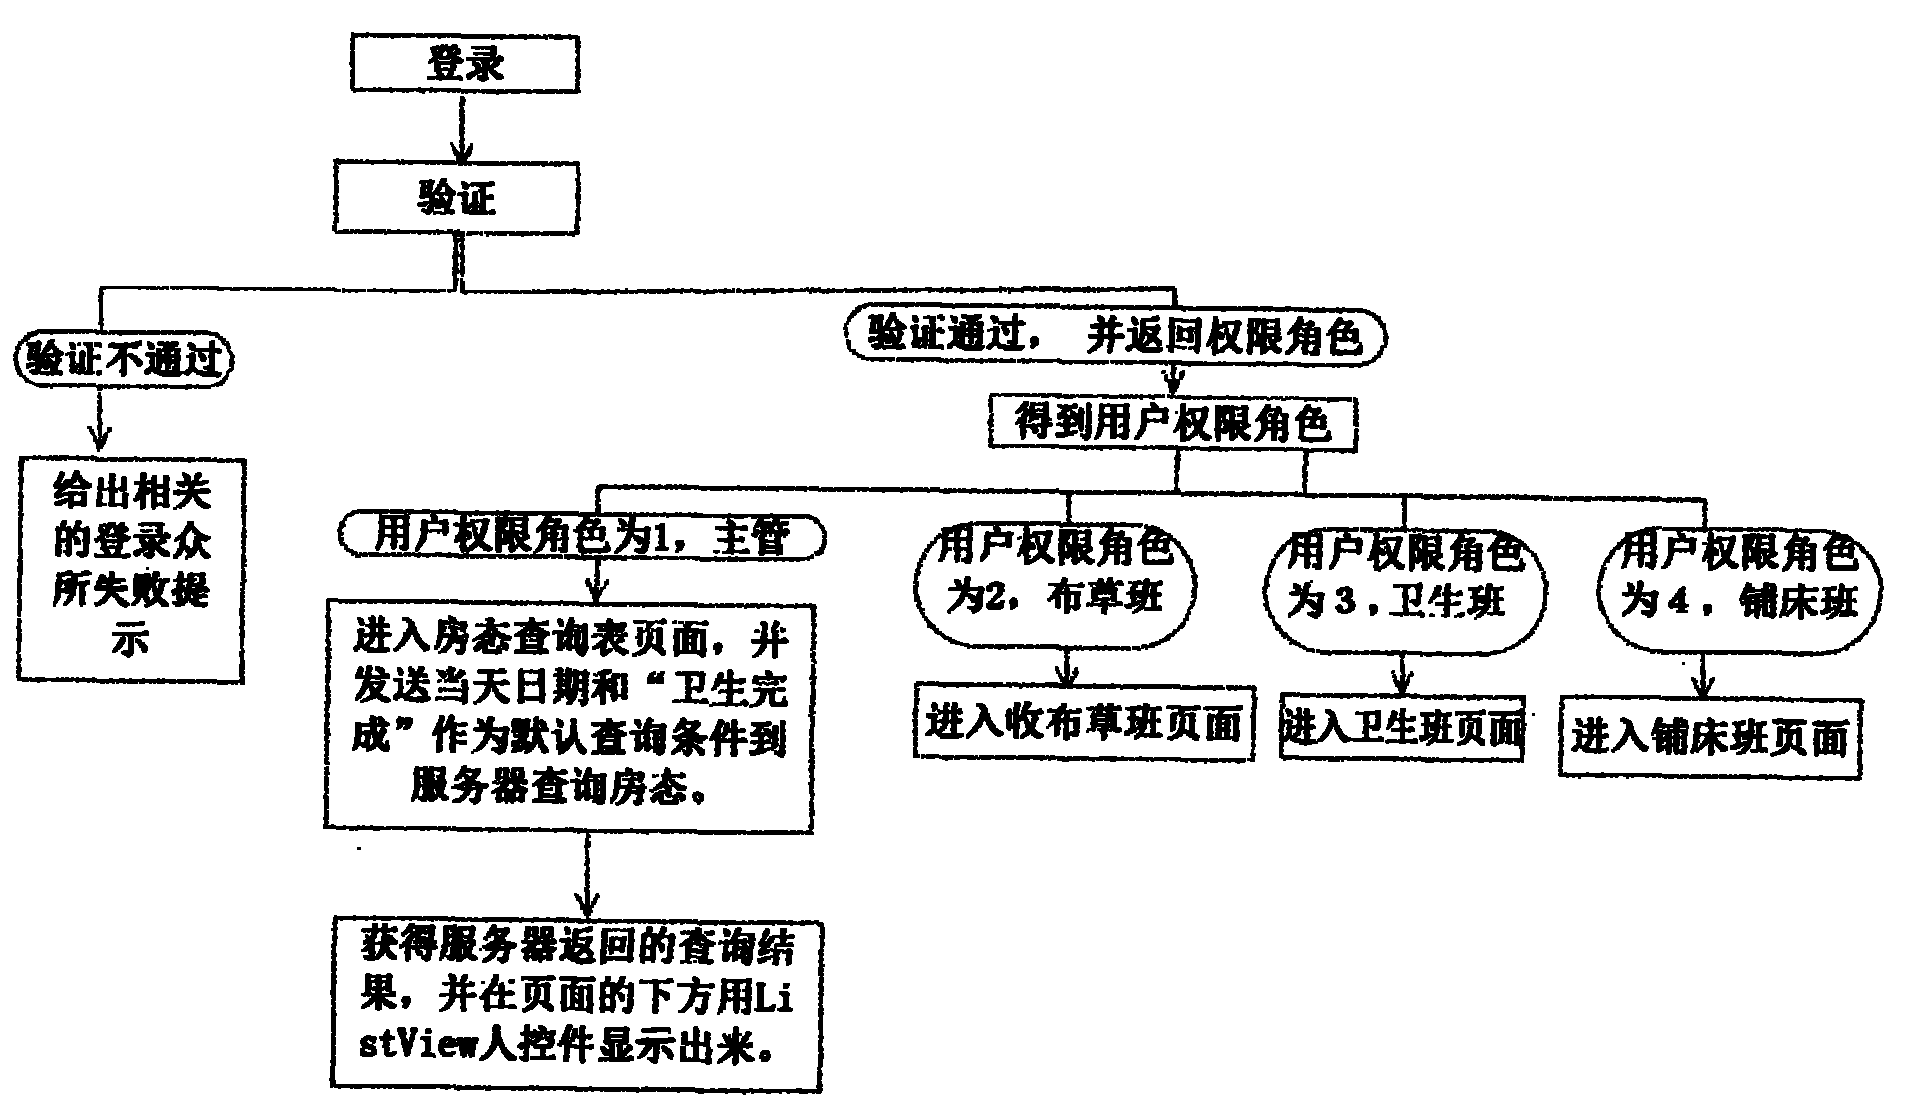 Intelligent hotel workflow management system, process management method and check-in registering method